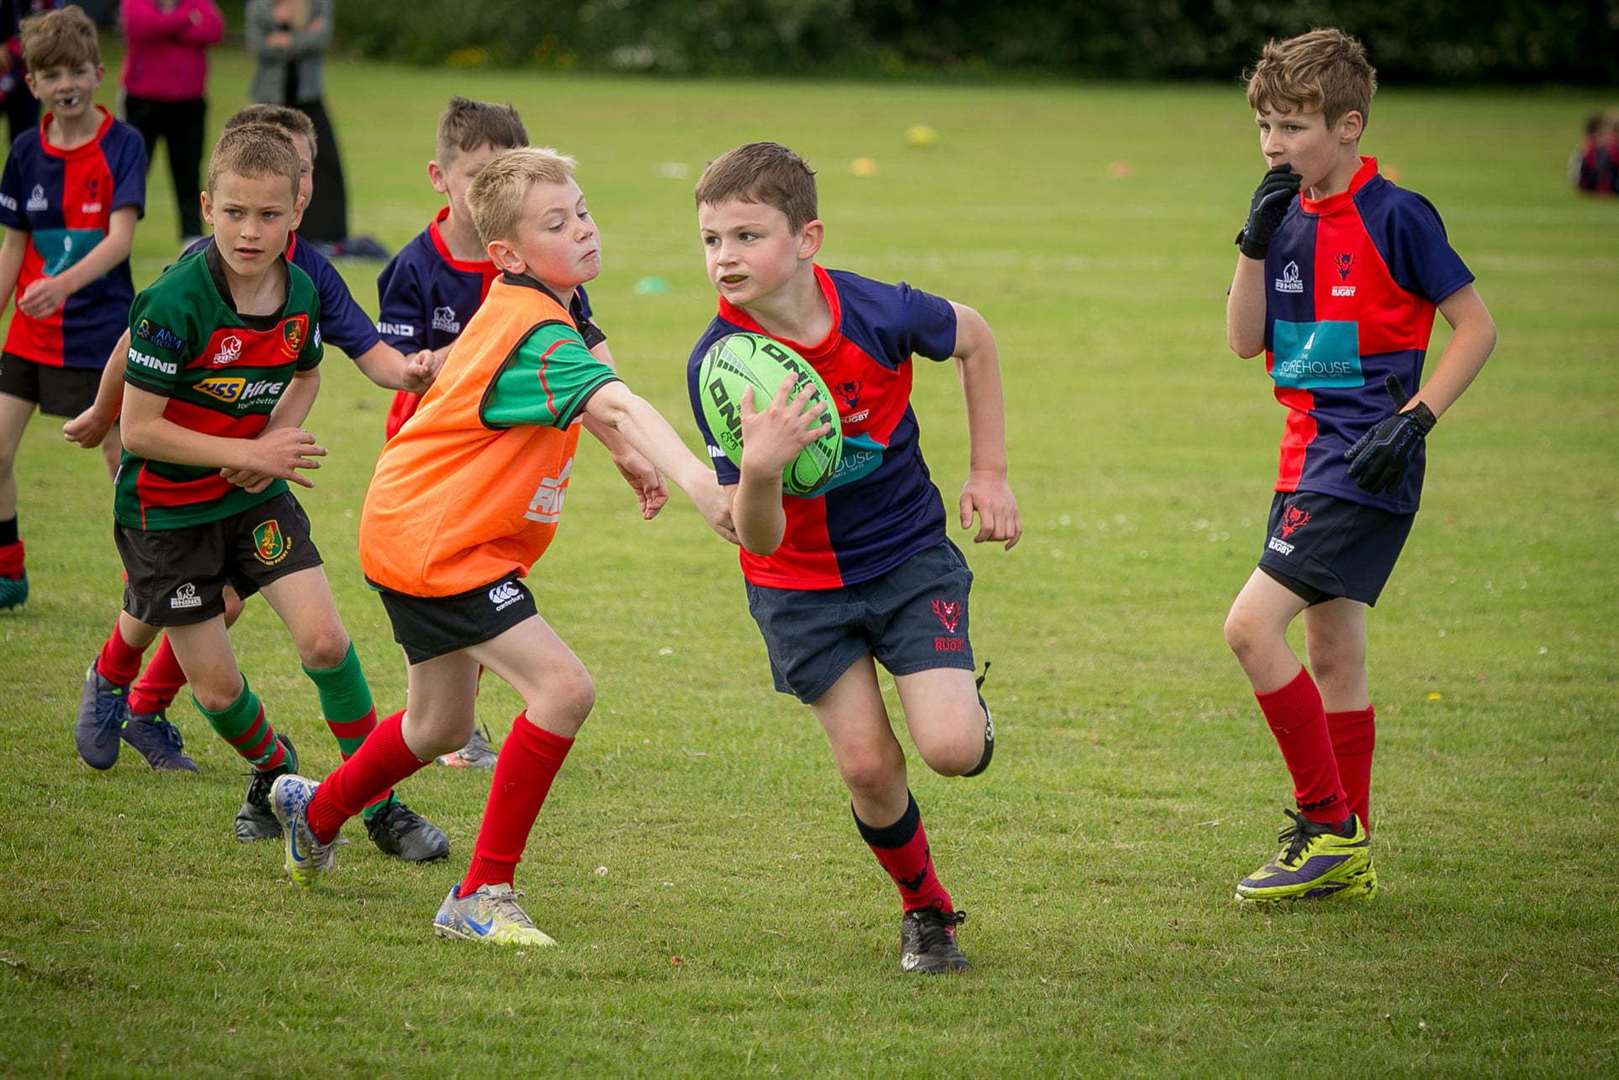 Ross Sutherland are running a full programme of youth rugby over the summer holidays.